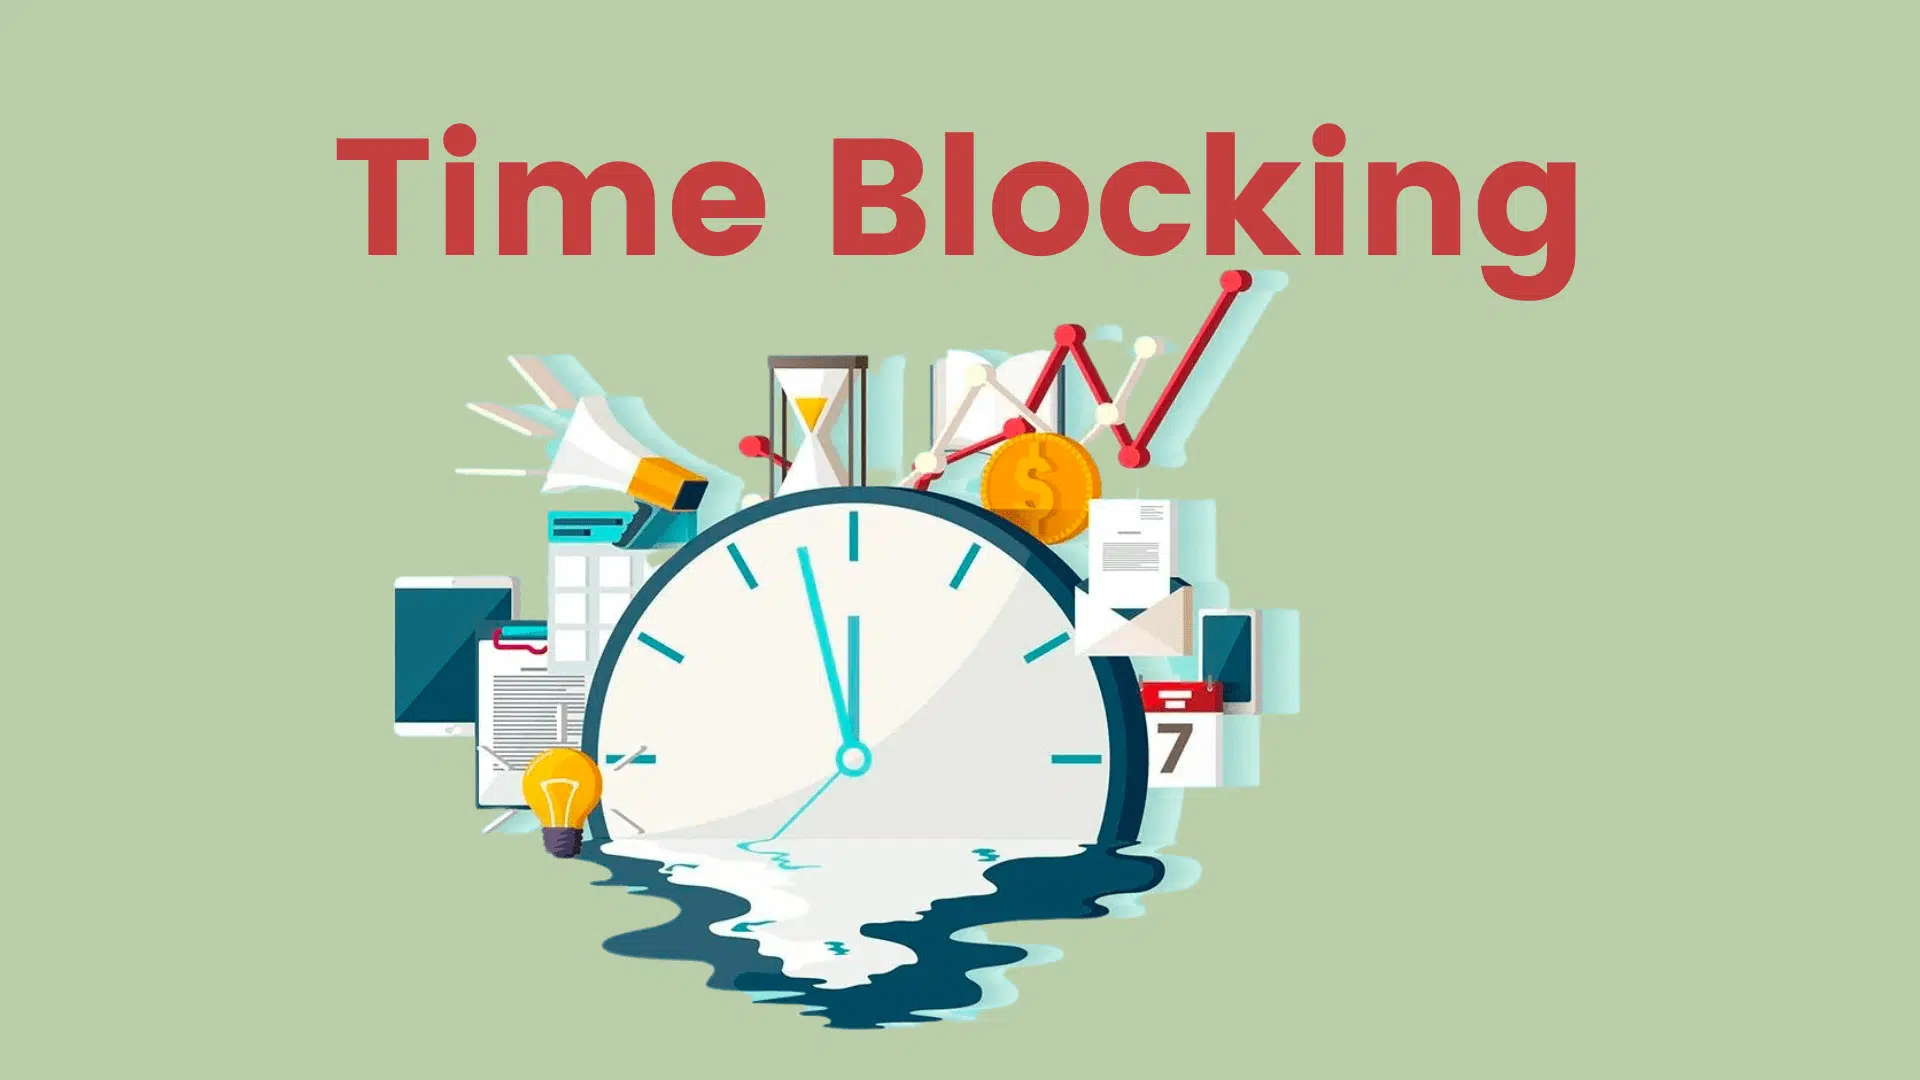 The Complete Guide to Time Blocking